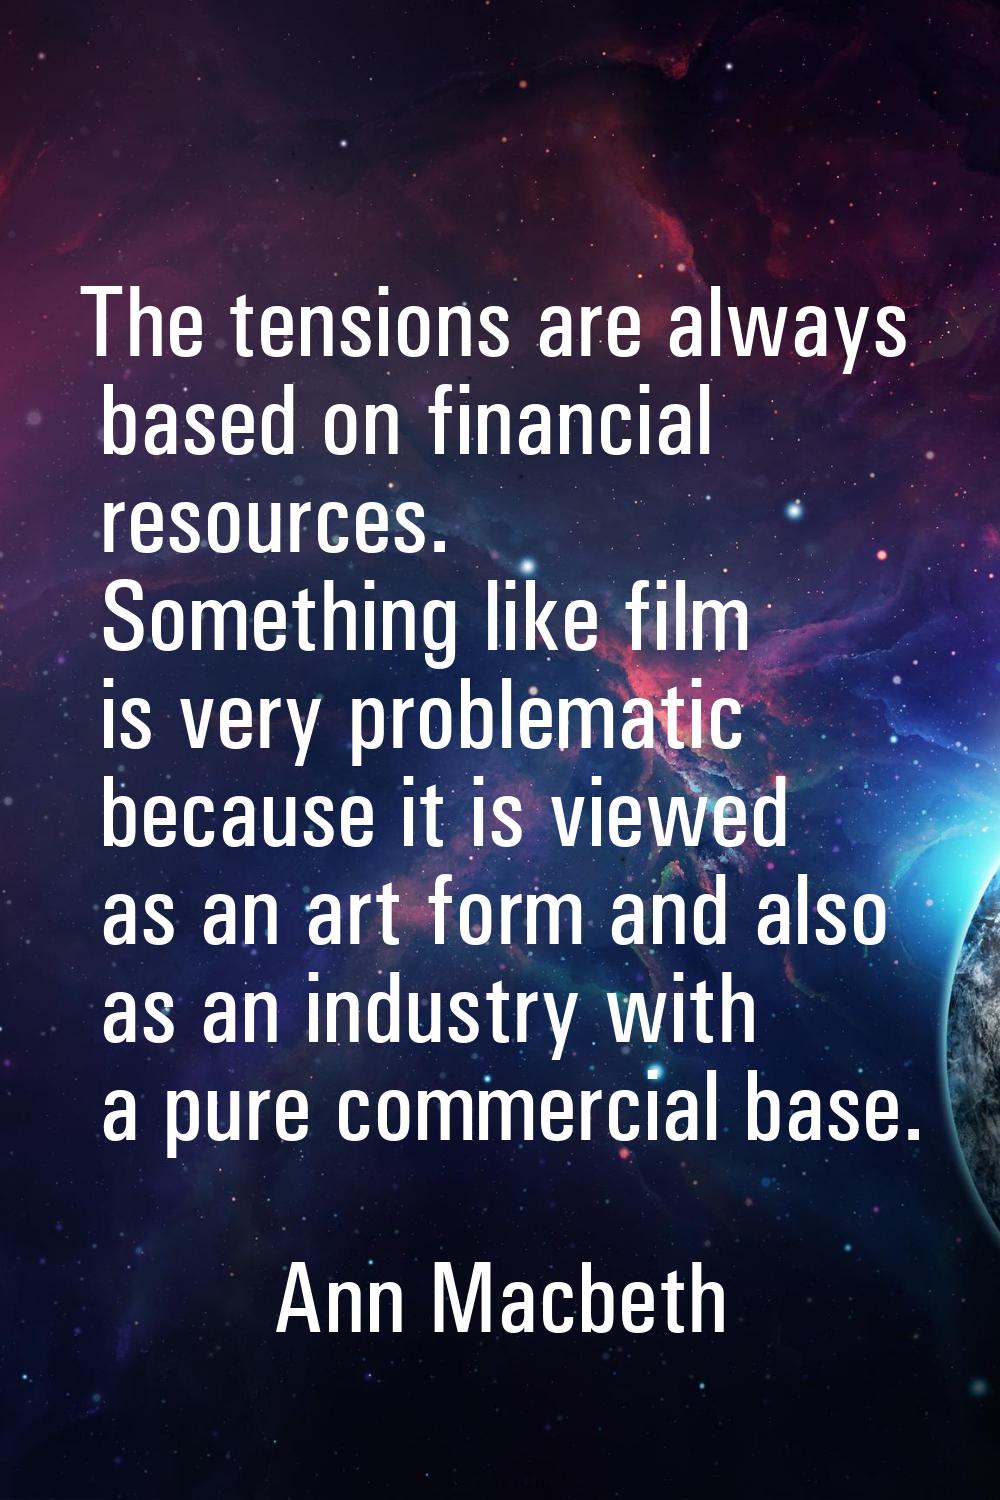 The tensions are always based on financial resources. Something like film is very problematic becau